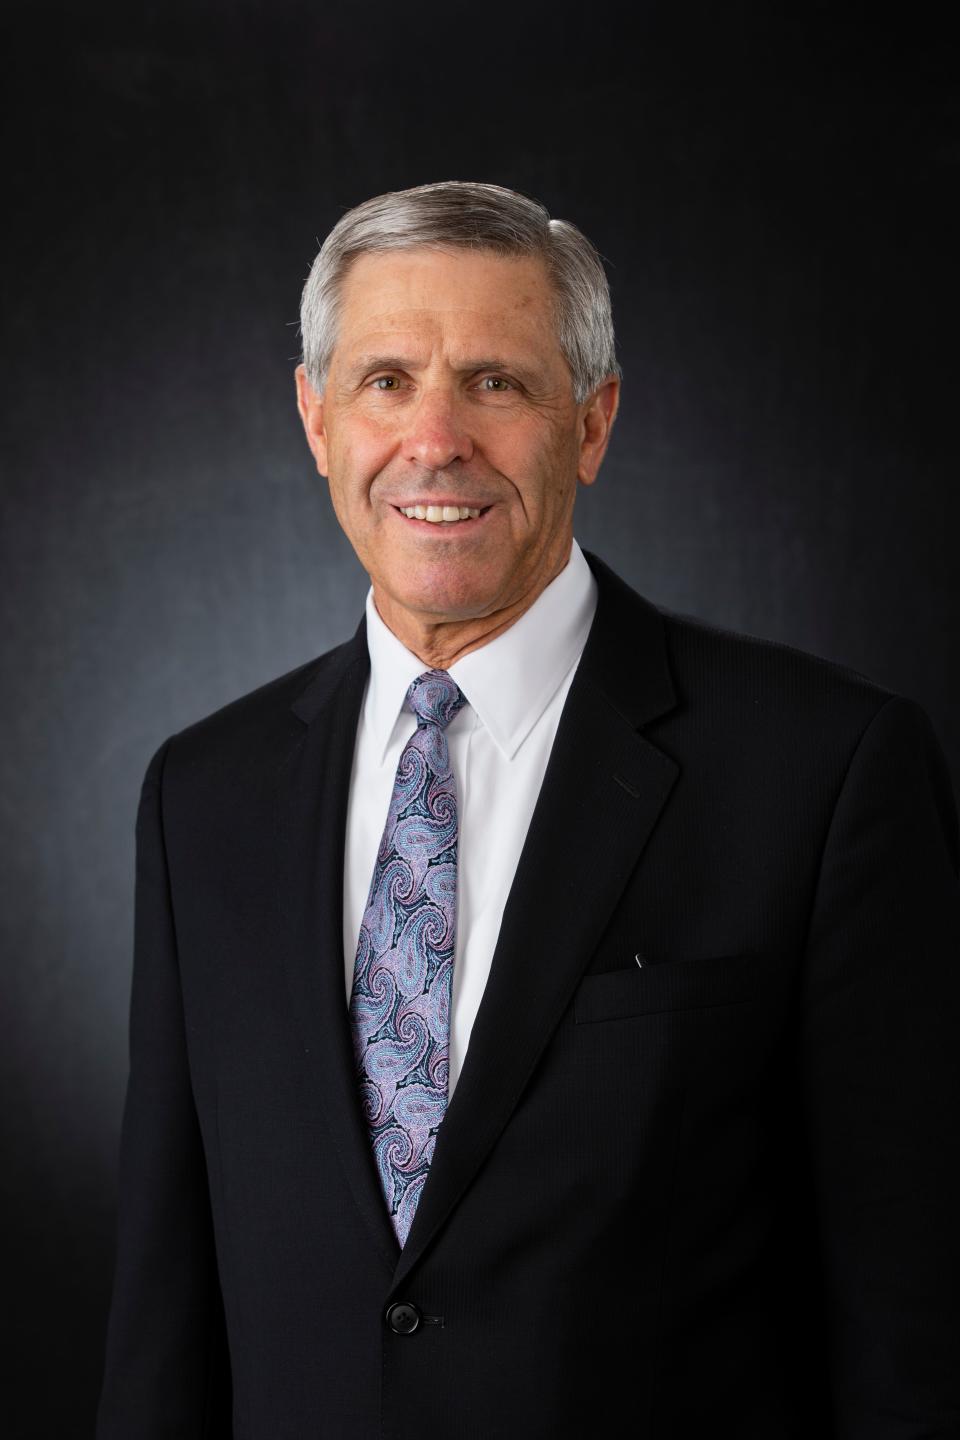 Hillsdale College Athletic Director Don Brubacher plans to retire in 2023.